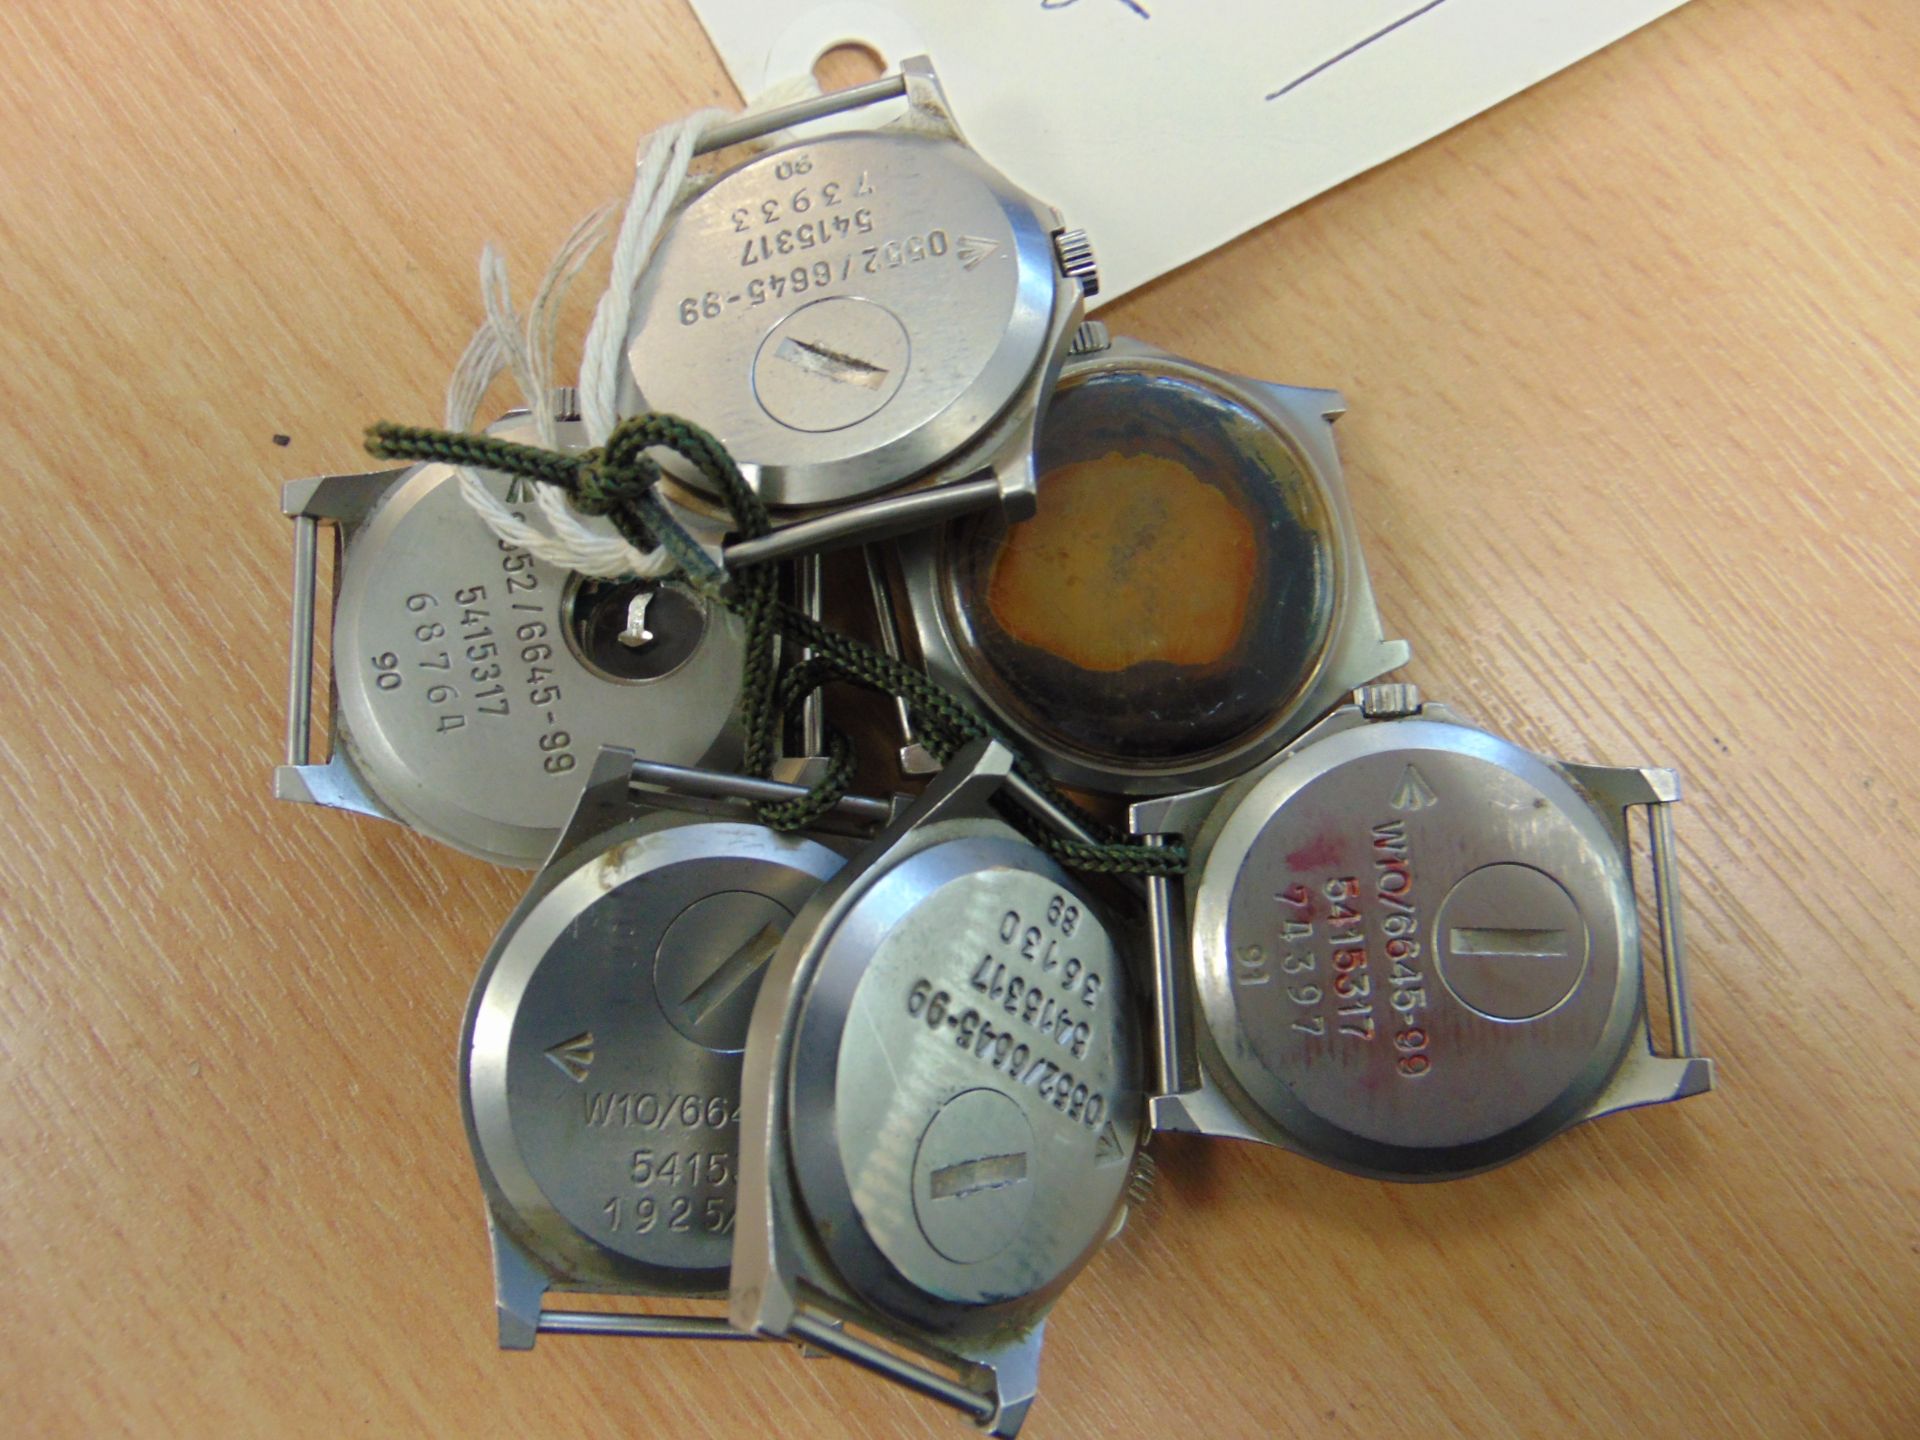 6X CWC W10 0552 SERVICES WATCHES - SPARES OR REPAIR - Image 6 of 6